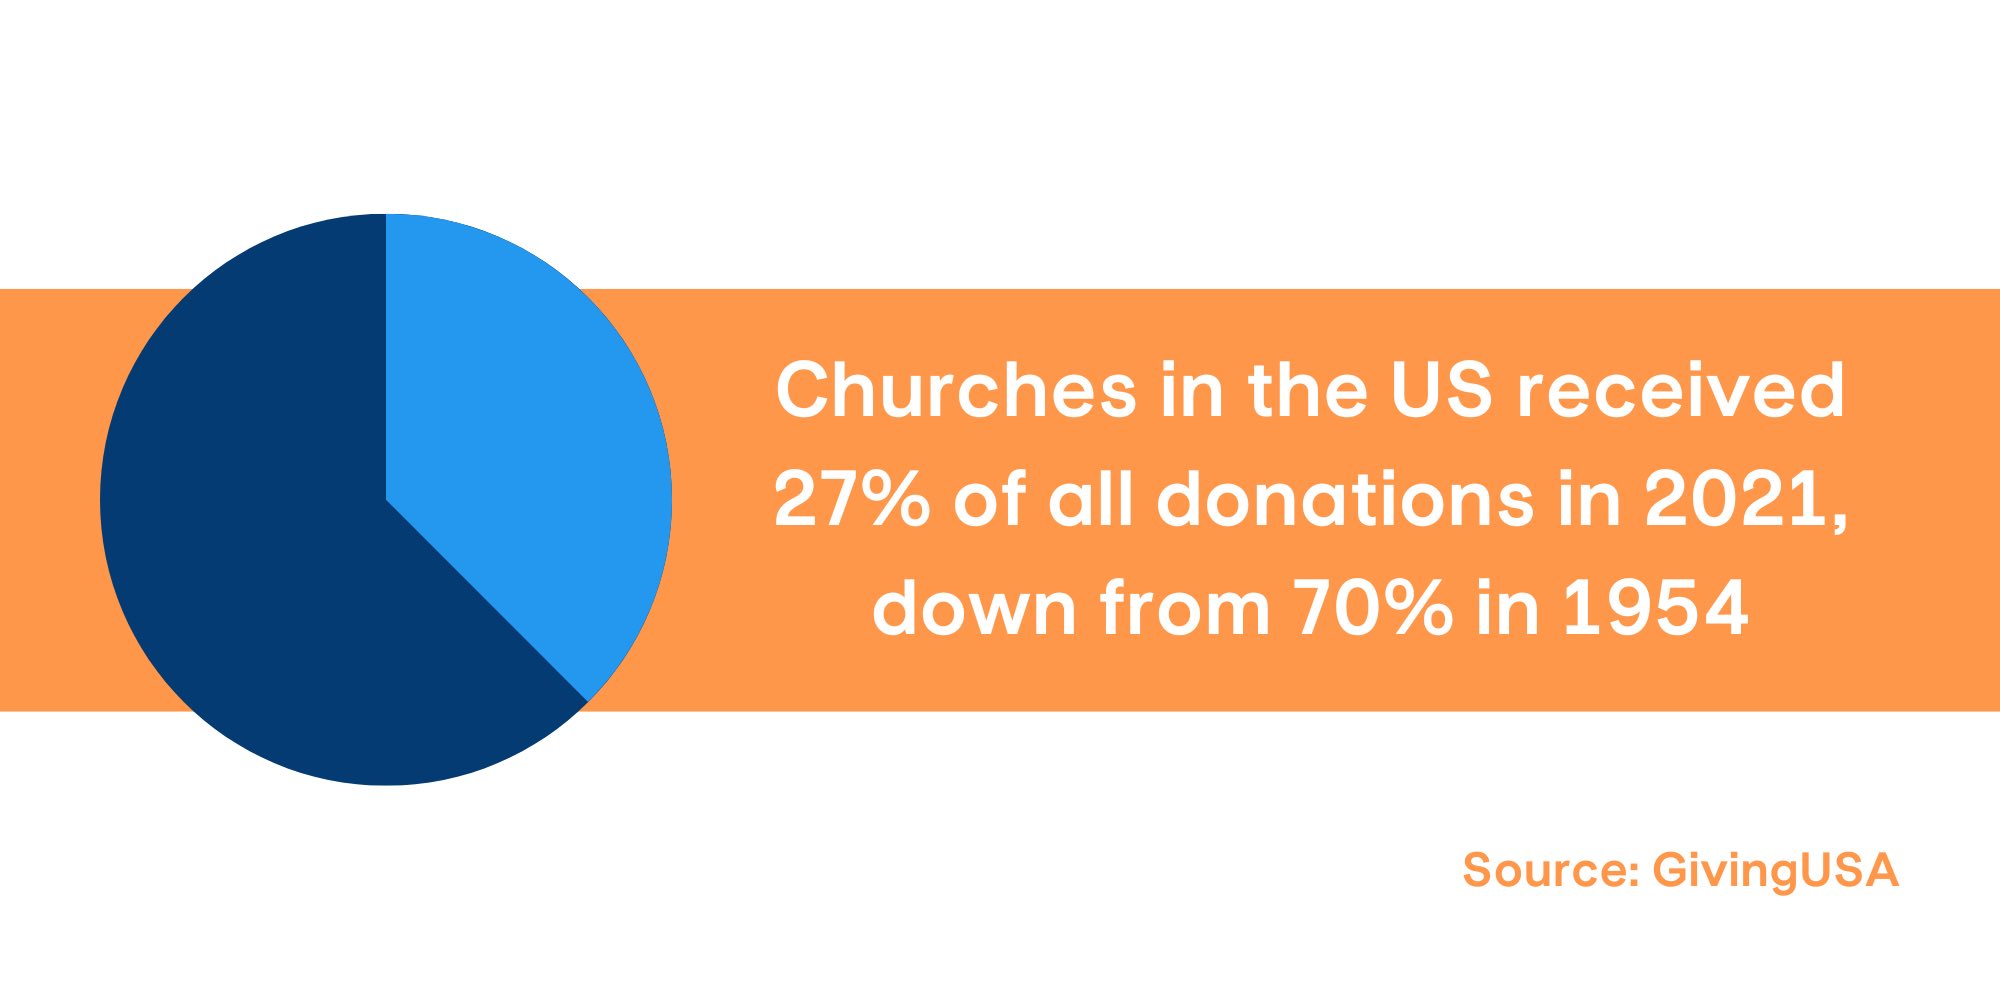 The church received more than one-fourth of all donations made in 2021